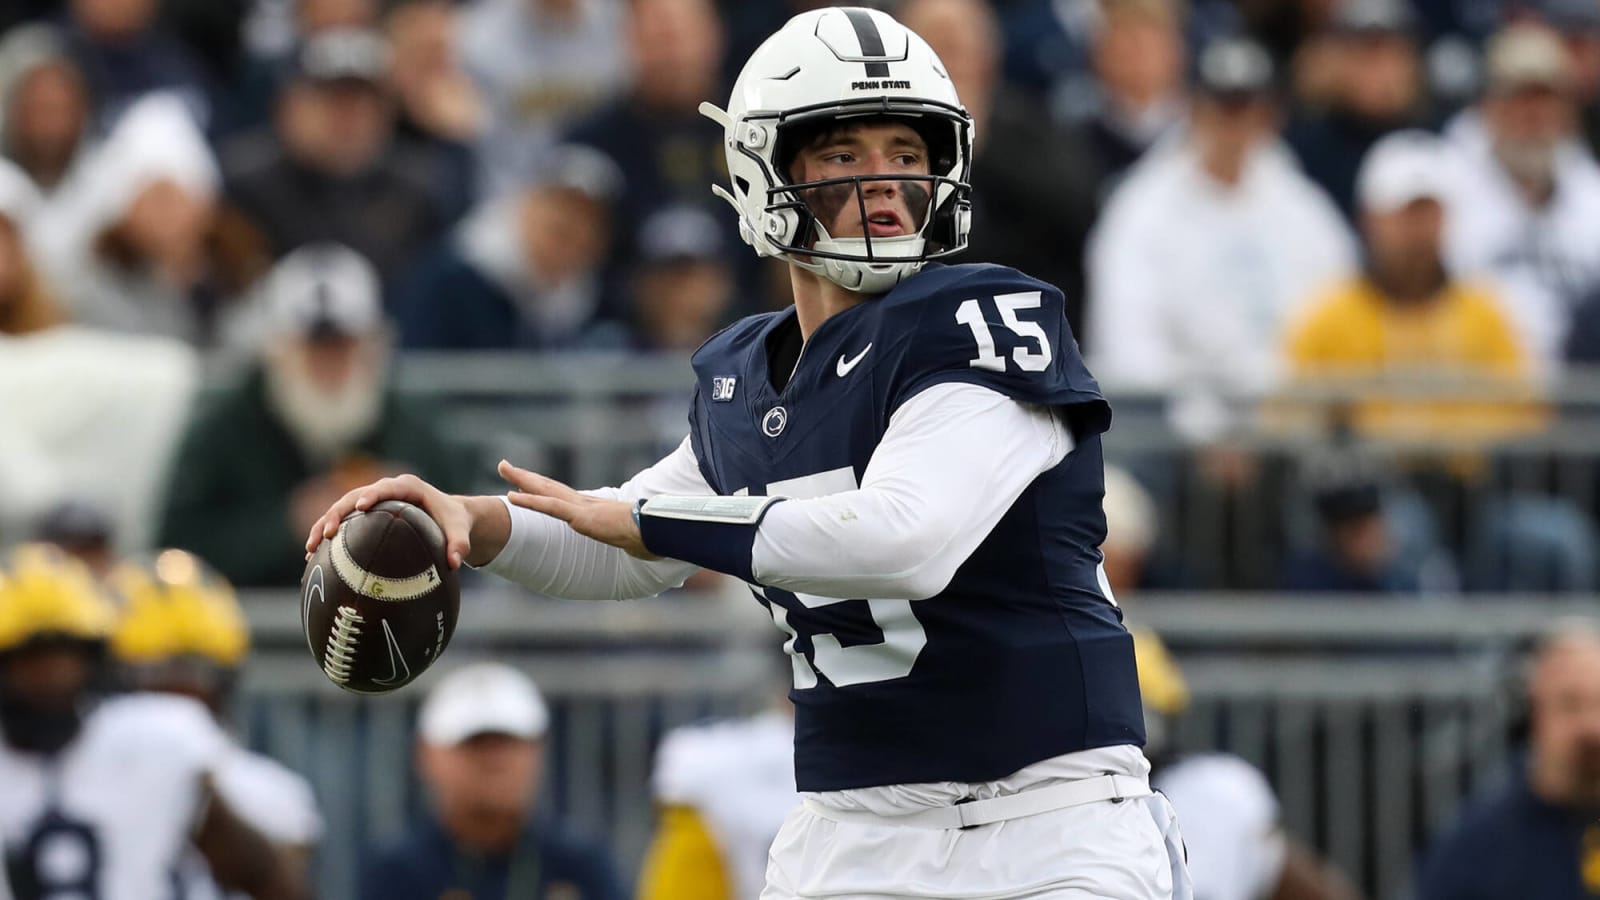 How to watch Penn State Nittany Lions